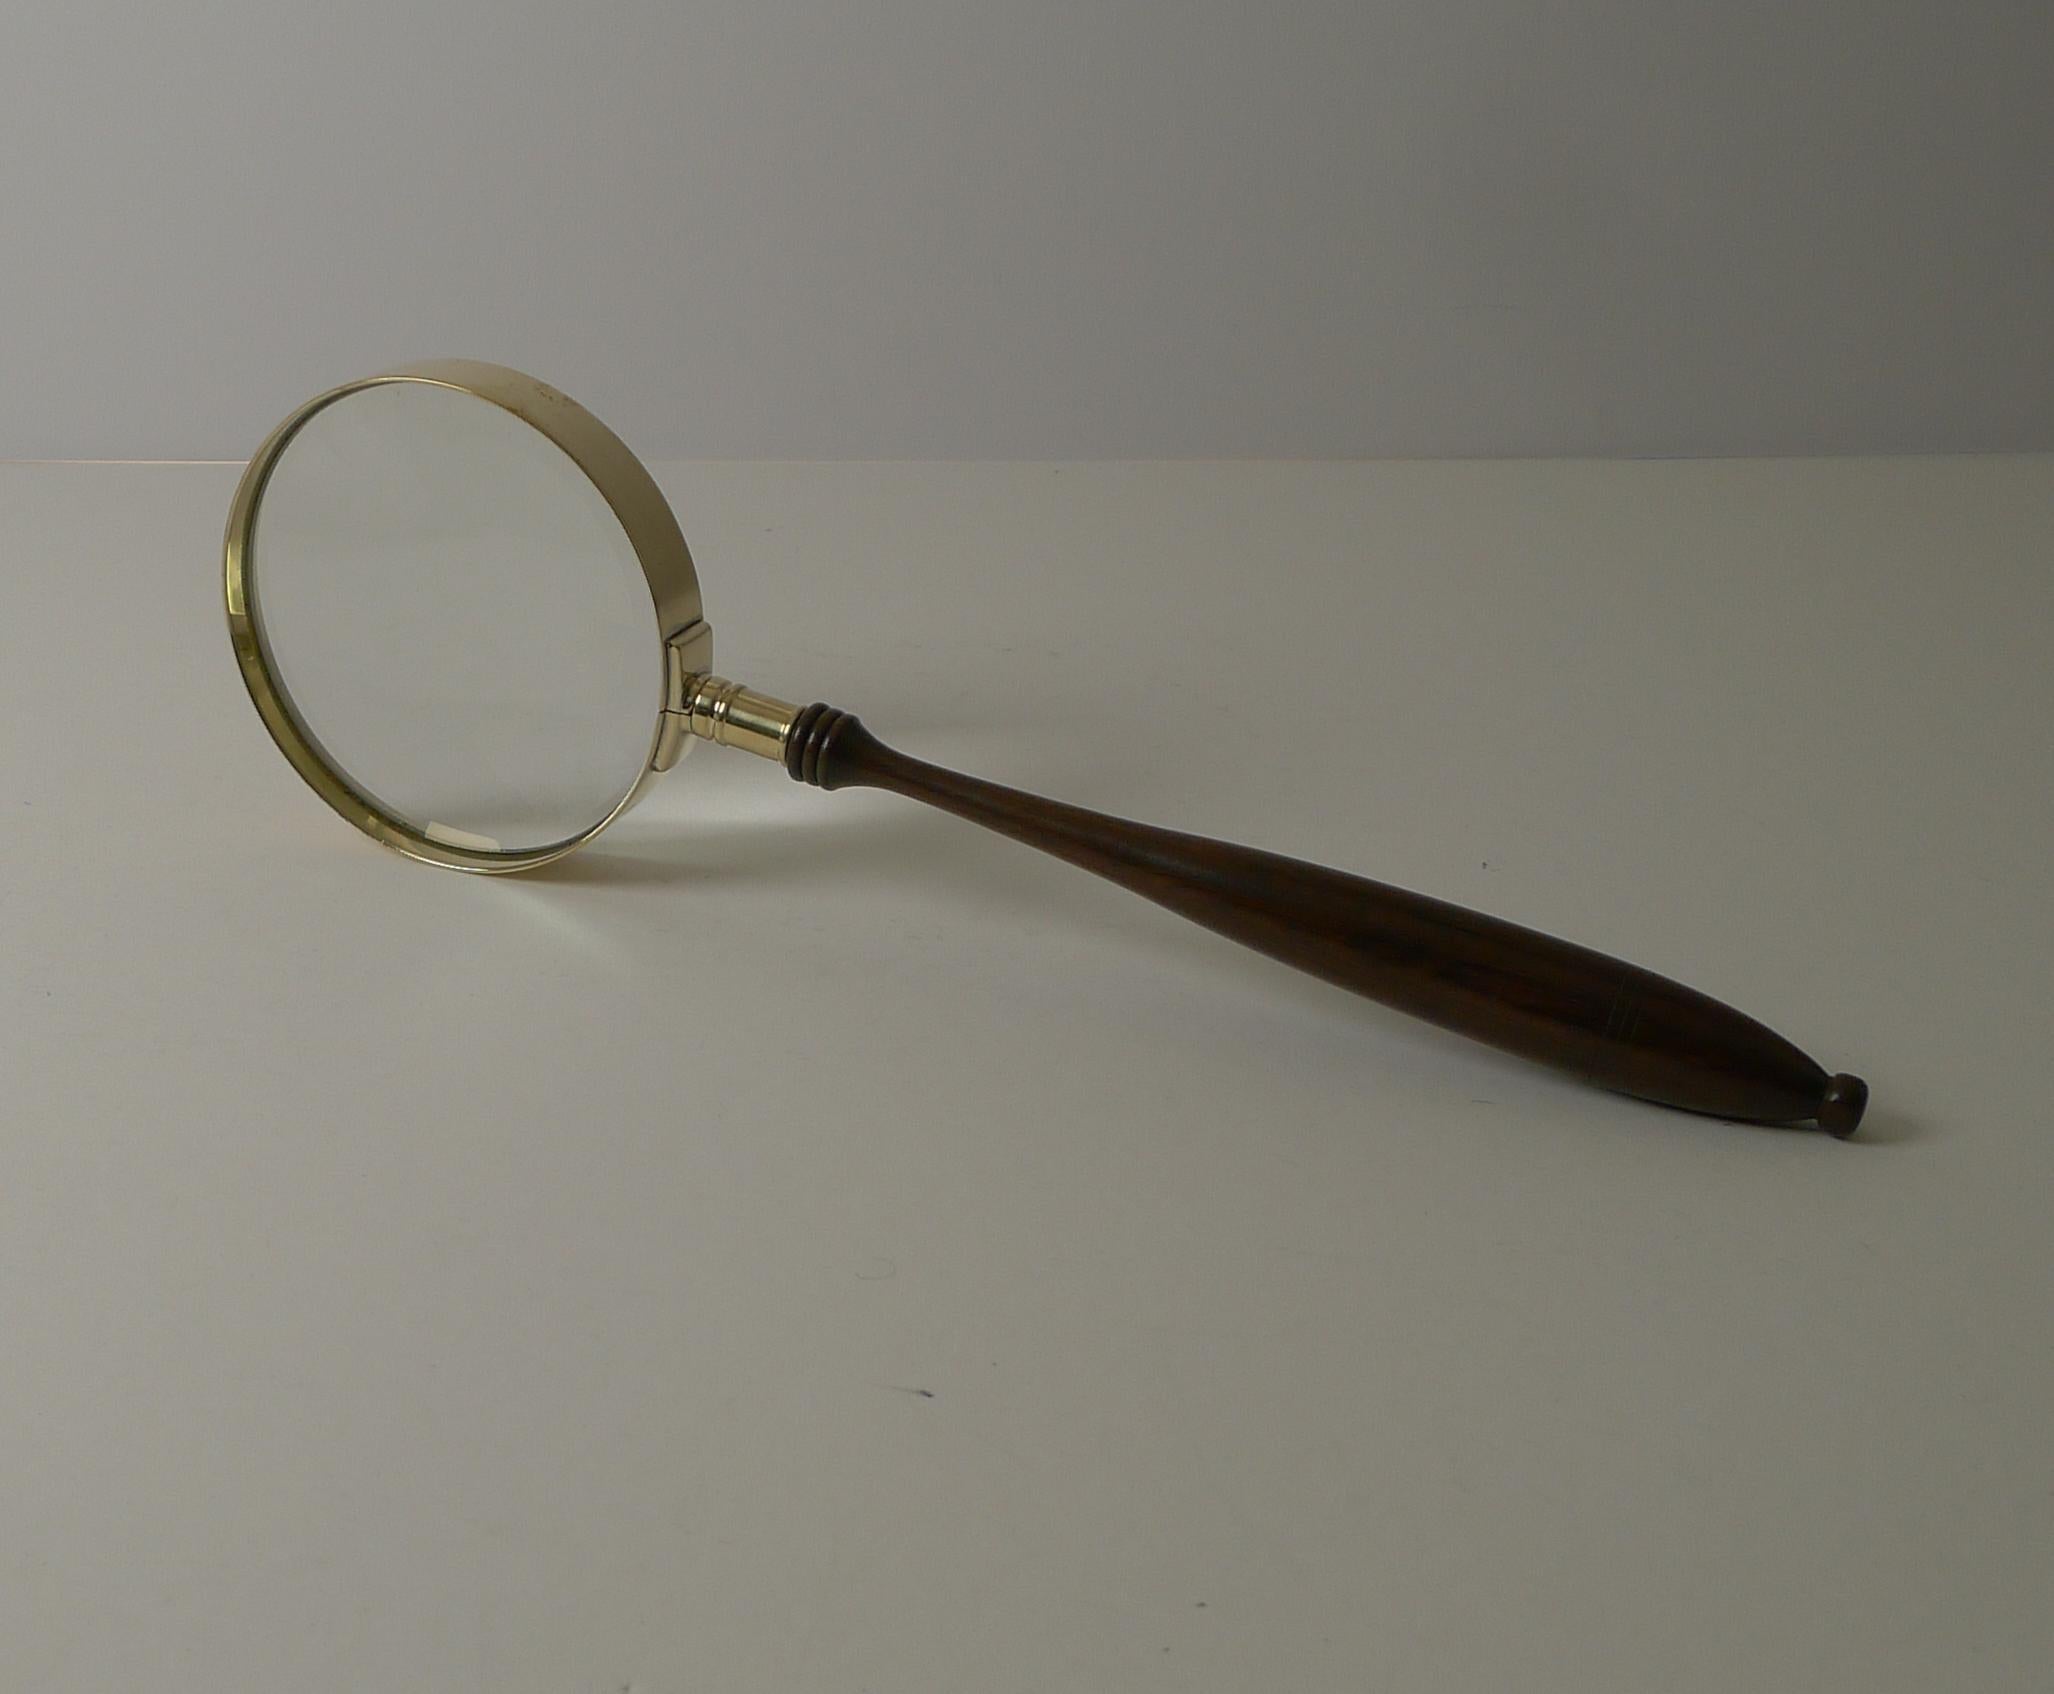 A very handsome and unusual late Victorian / early Edwardian magnifying glass with it's extremely long turned wooden handle.

The brass frame has been professionally polished, restoring it to it's former glory. The glass has a good magnification